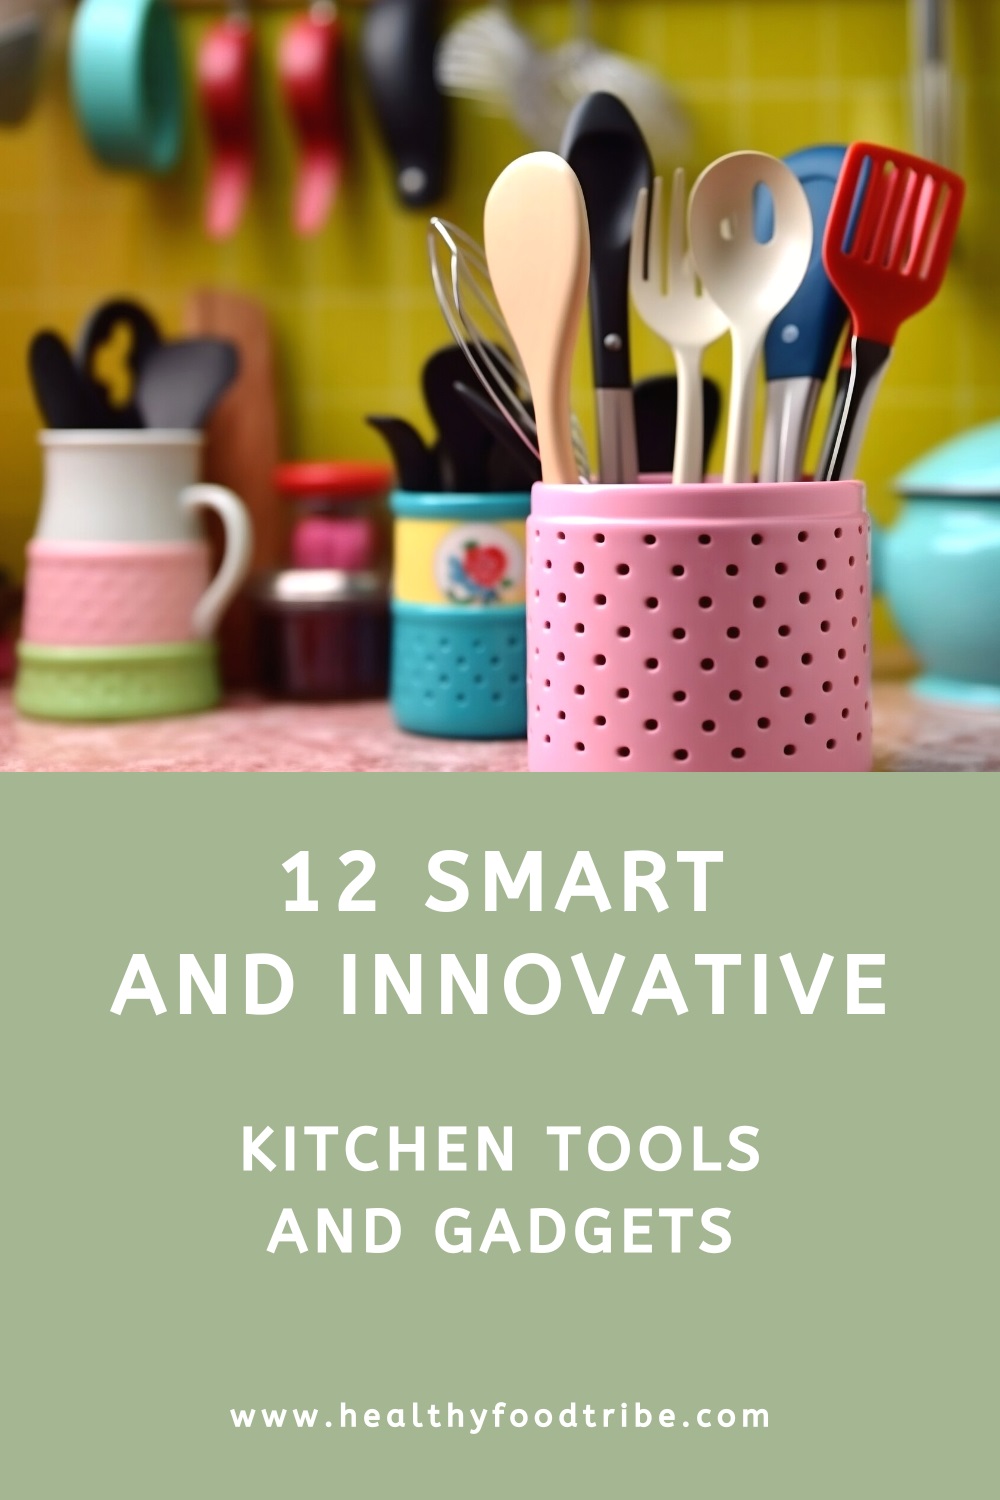 12 Smart kitchen tools and gadgets